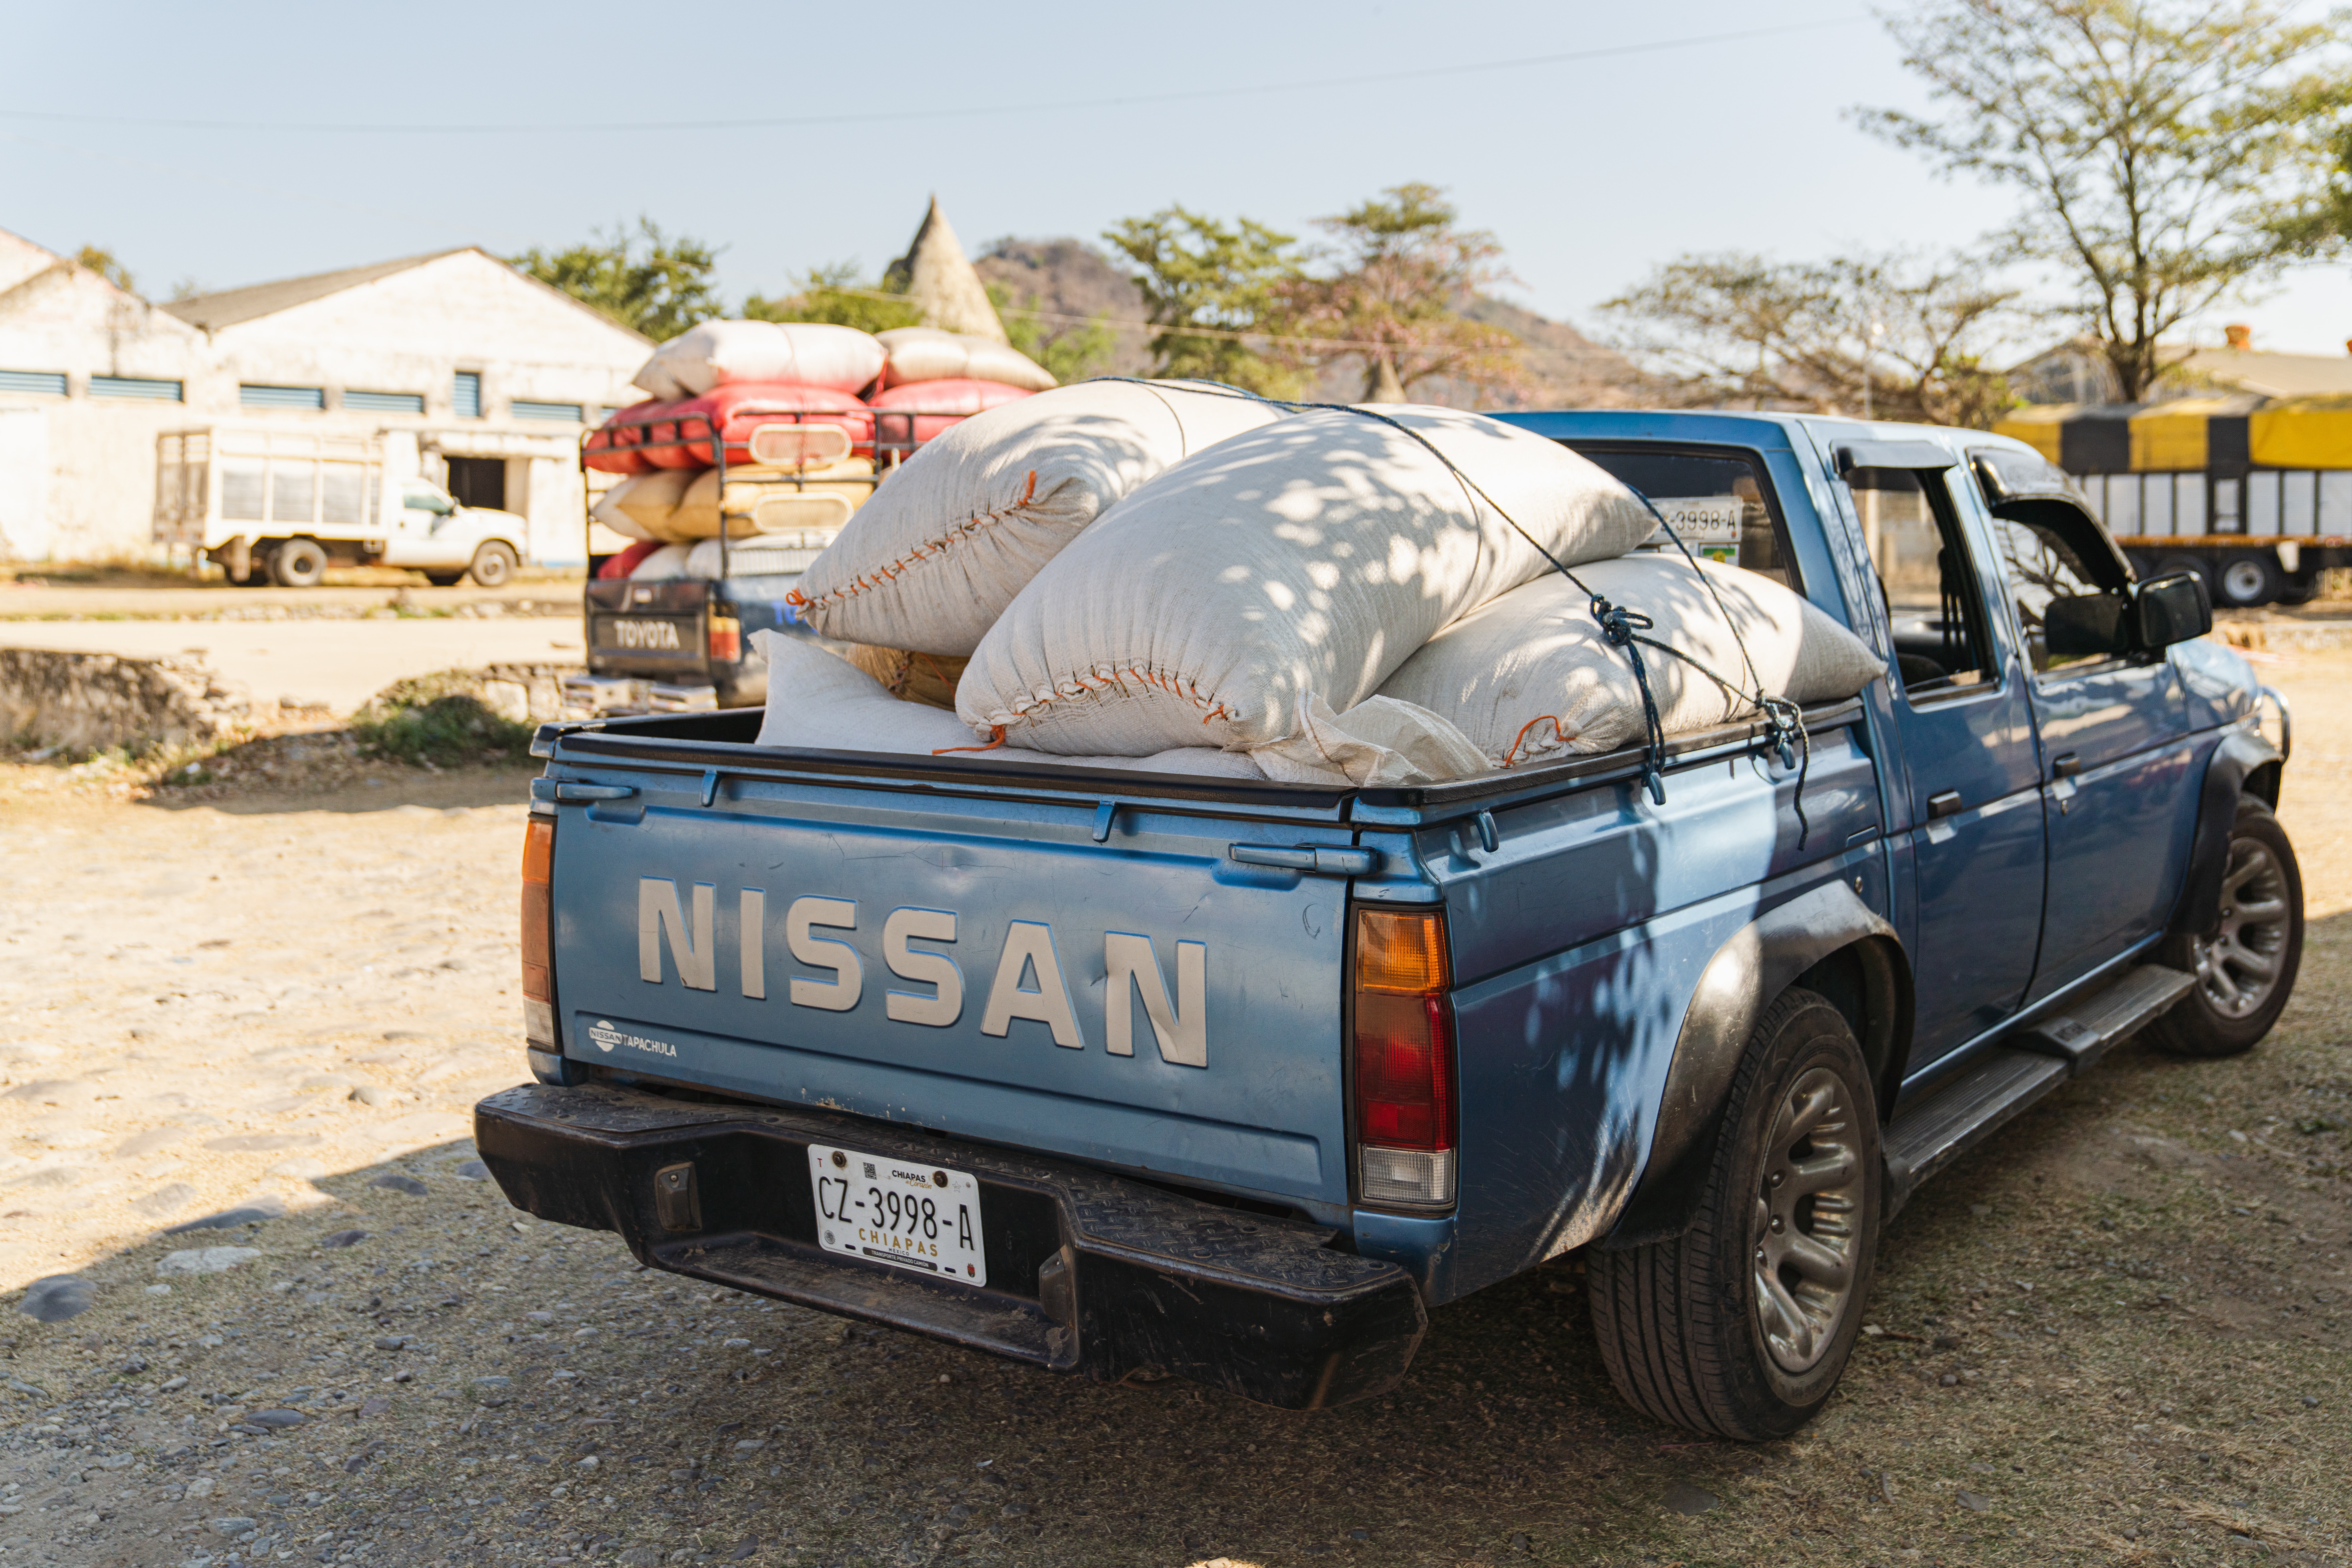 Nissan bakkie loaded with bags